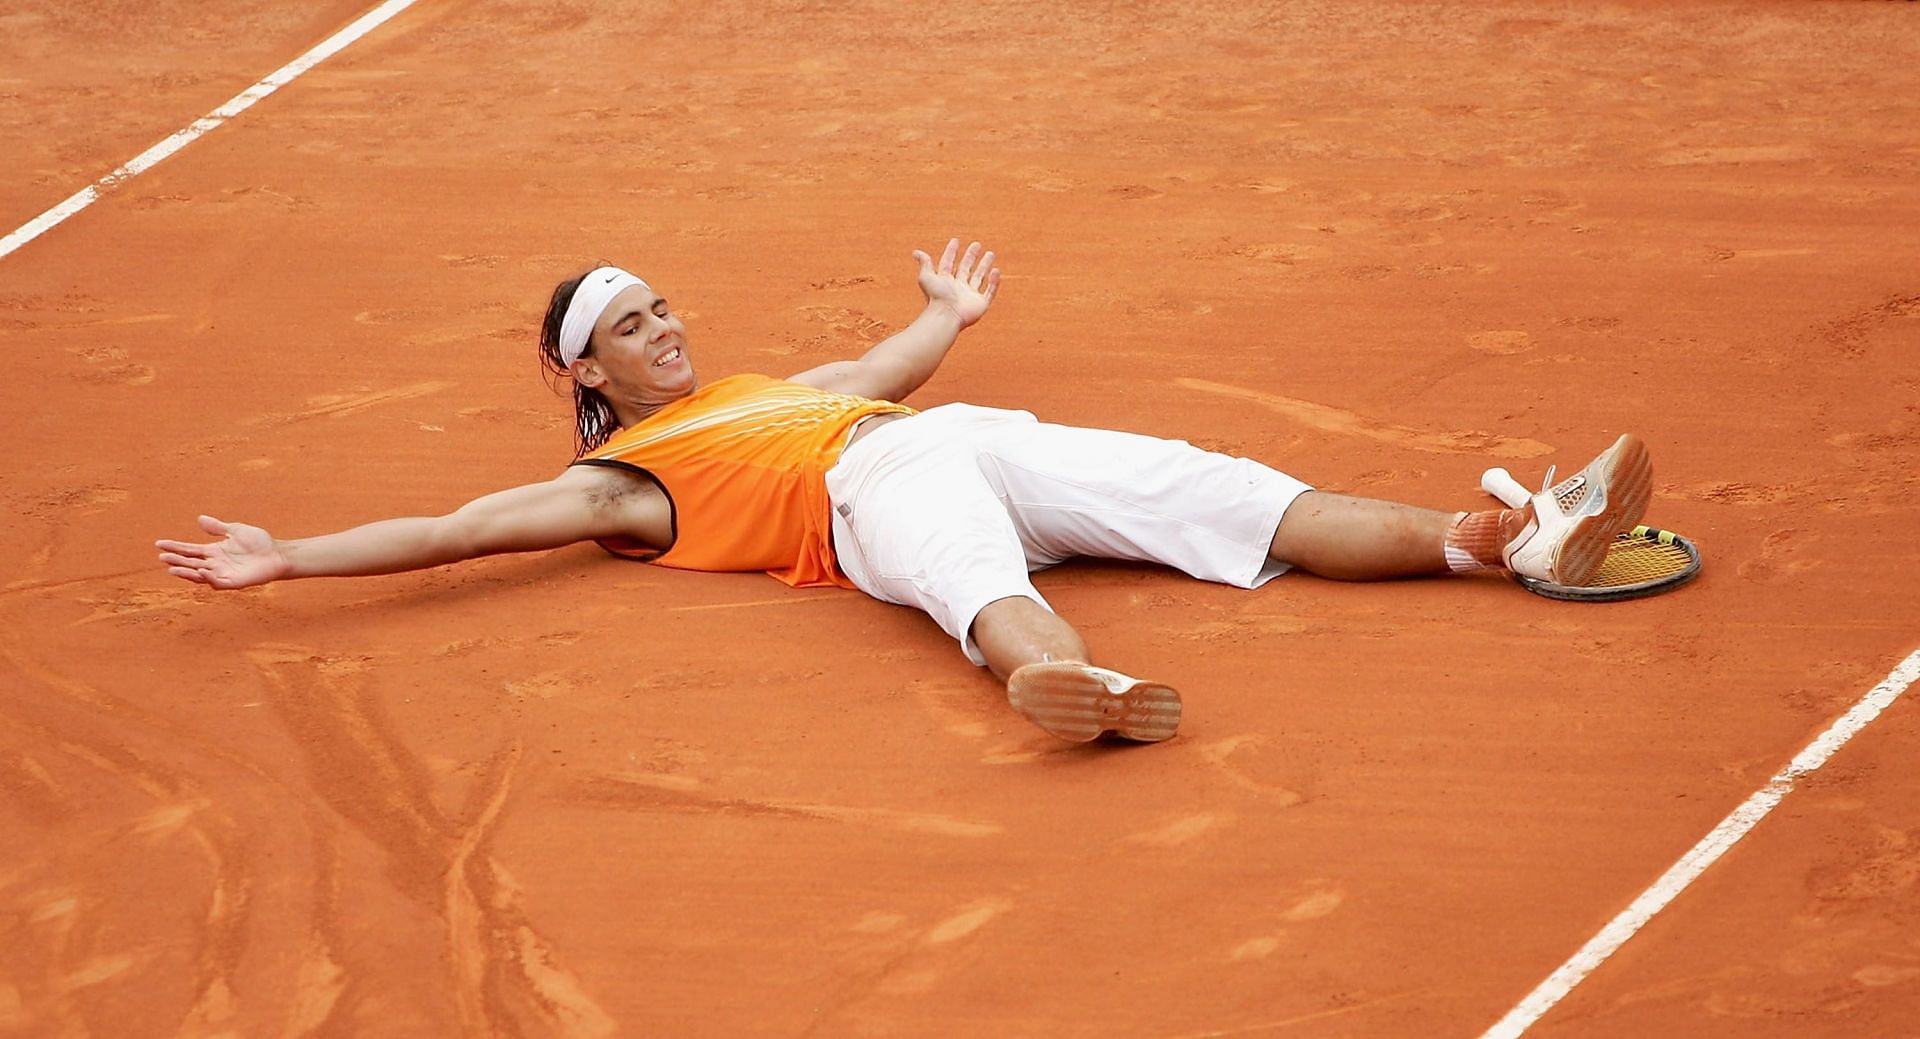 Rafael Nadal celebrates his first Masters 1000 title at the 2005 Monte-Carlo Masters